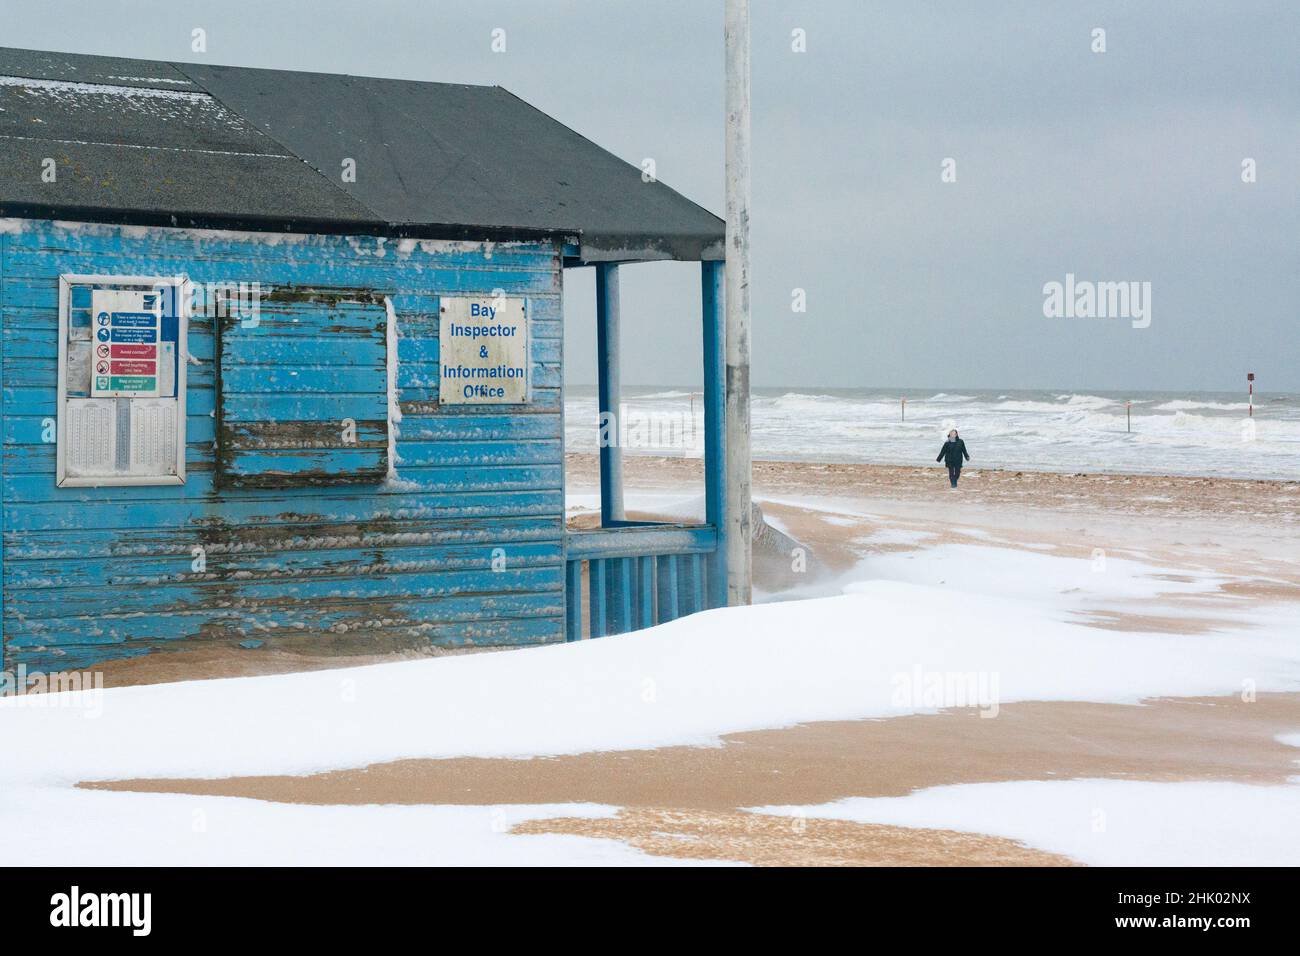 A dilapidated wooden beach hut on Margate Main Sands in the snow, Margate, Kent Stock Photo